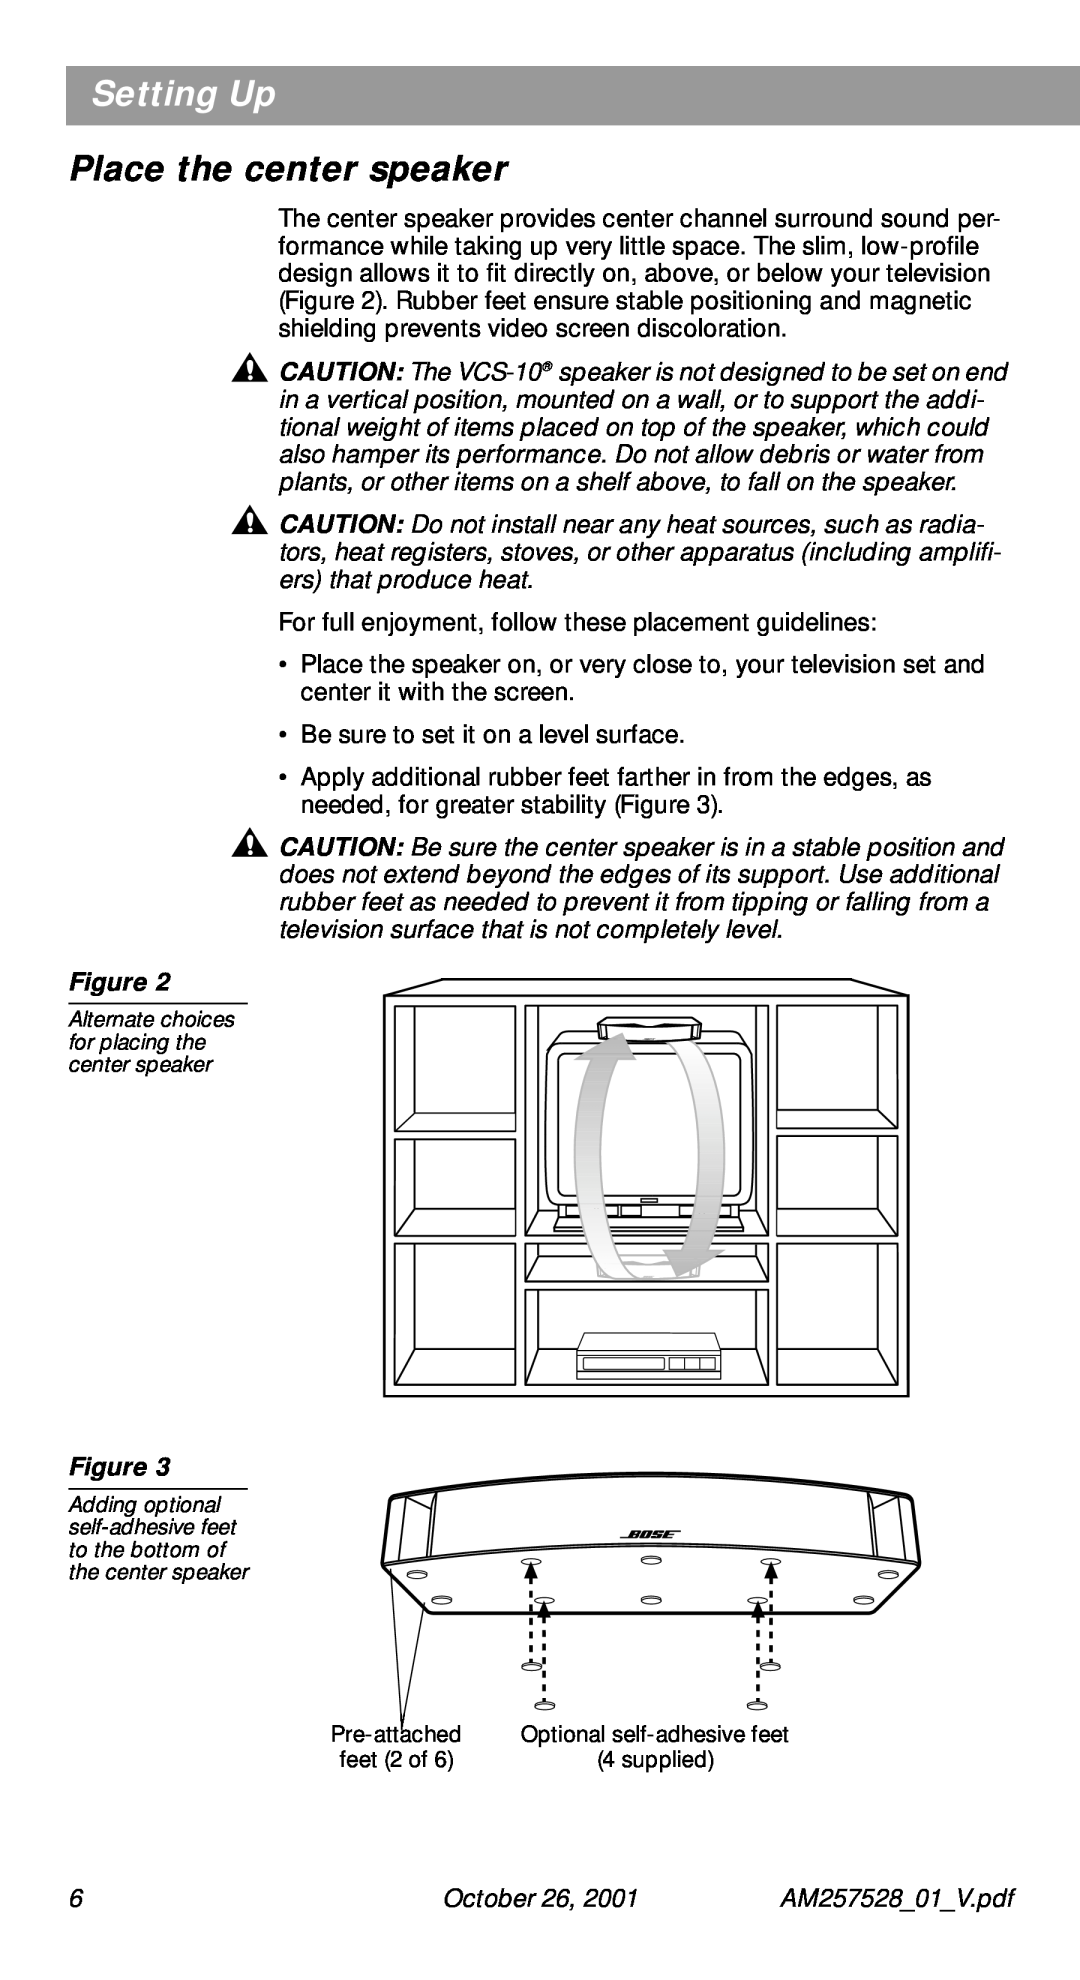 Bose 30 Series II manual Place the center speaker, Setting Up, October 